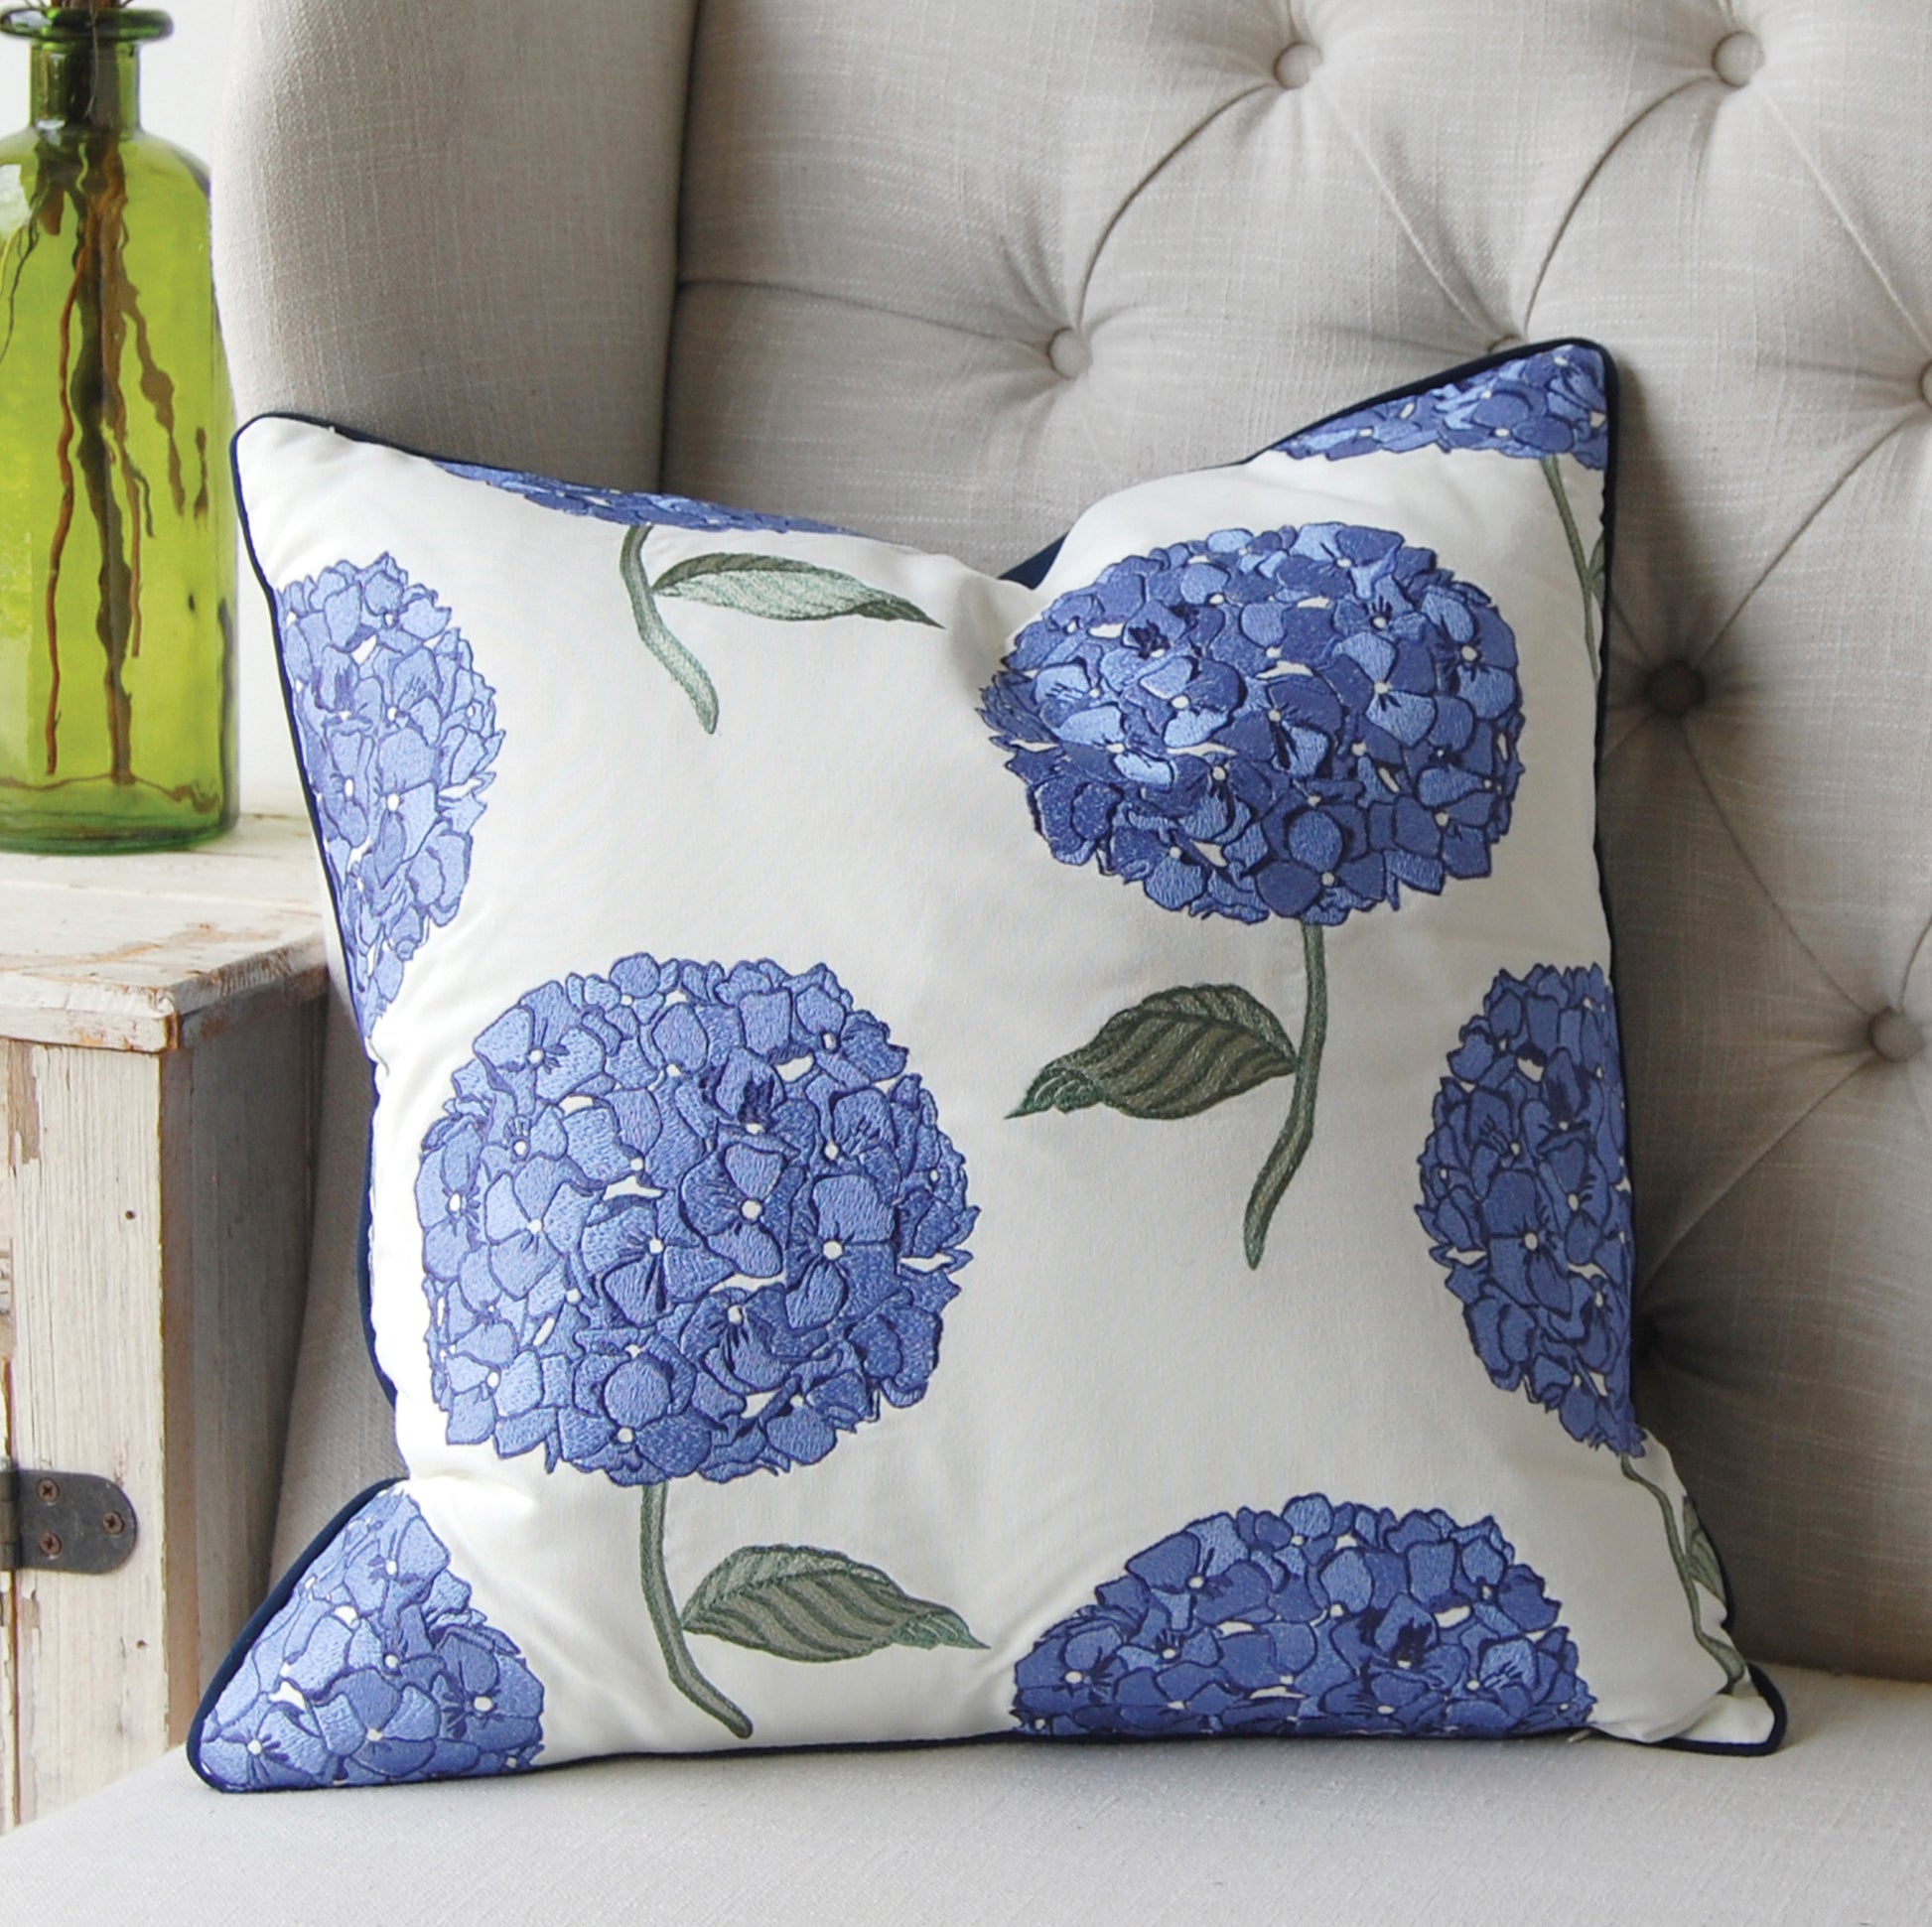 Hydrangea Pattern pillow styled on a tufted sofa.